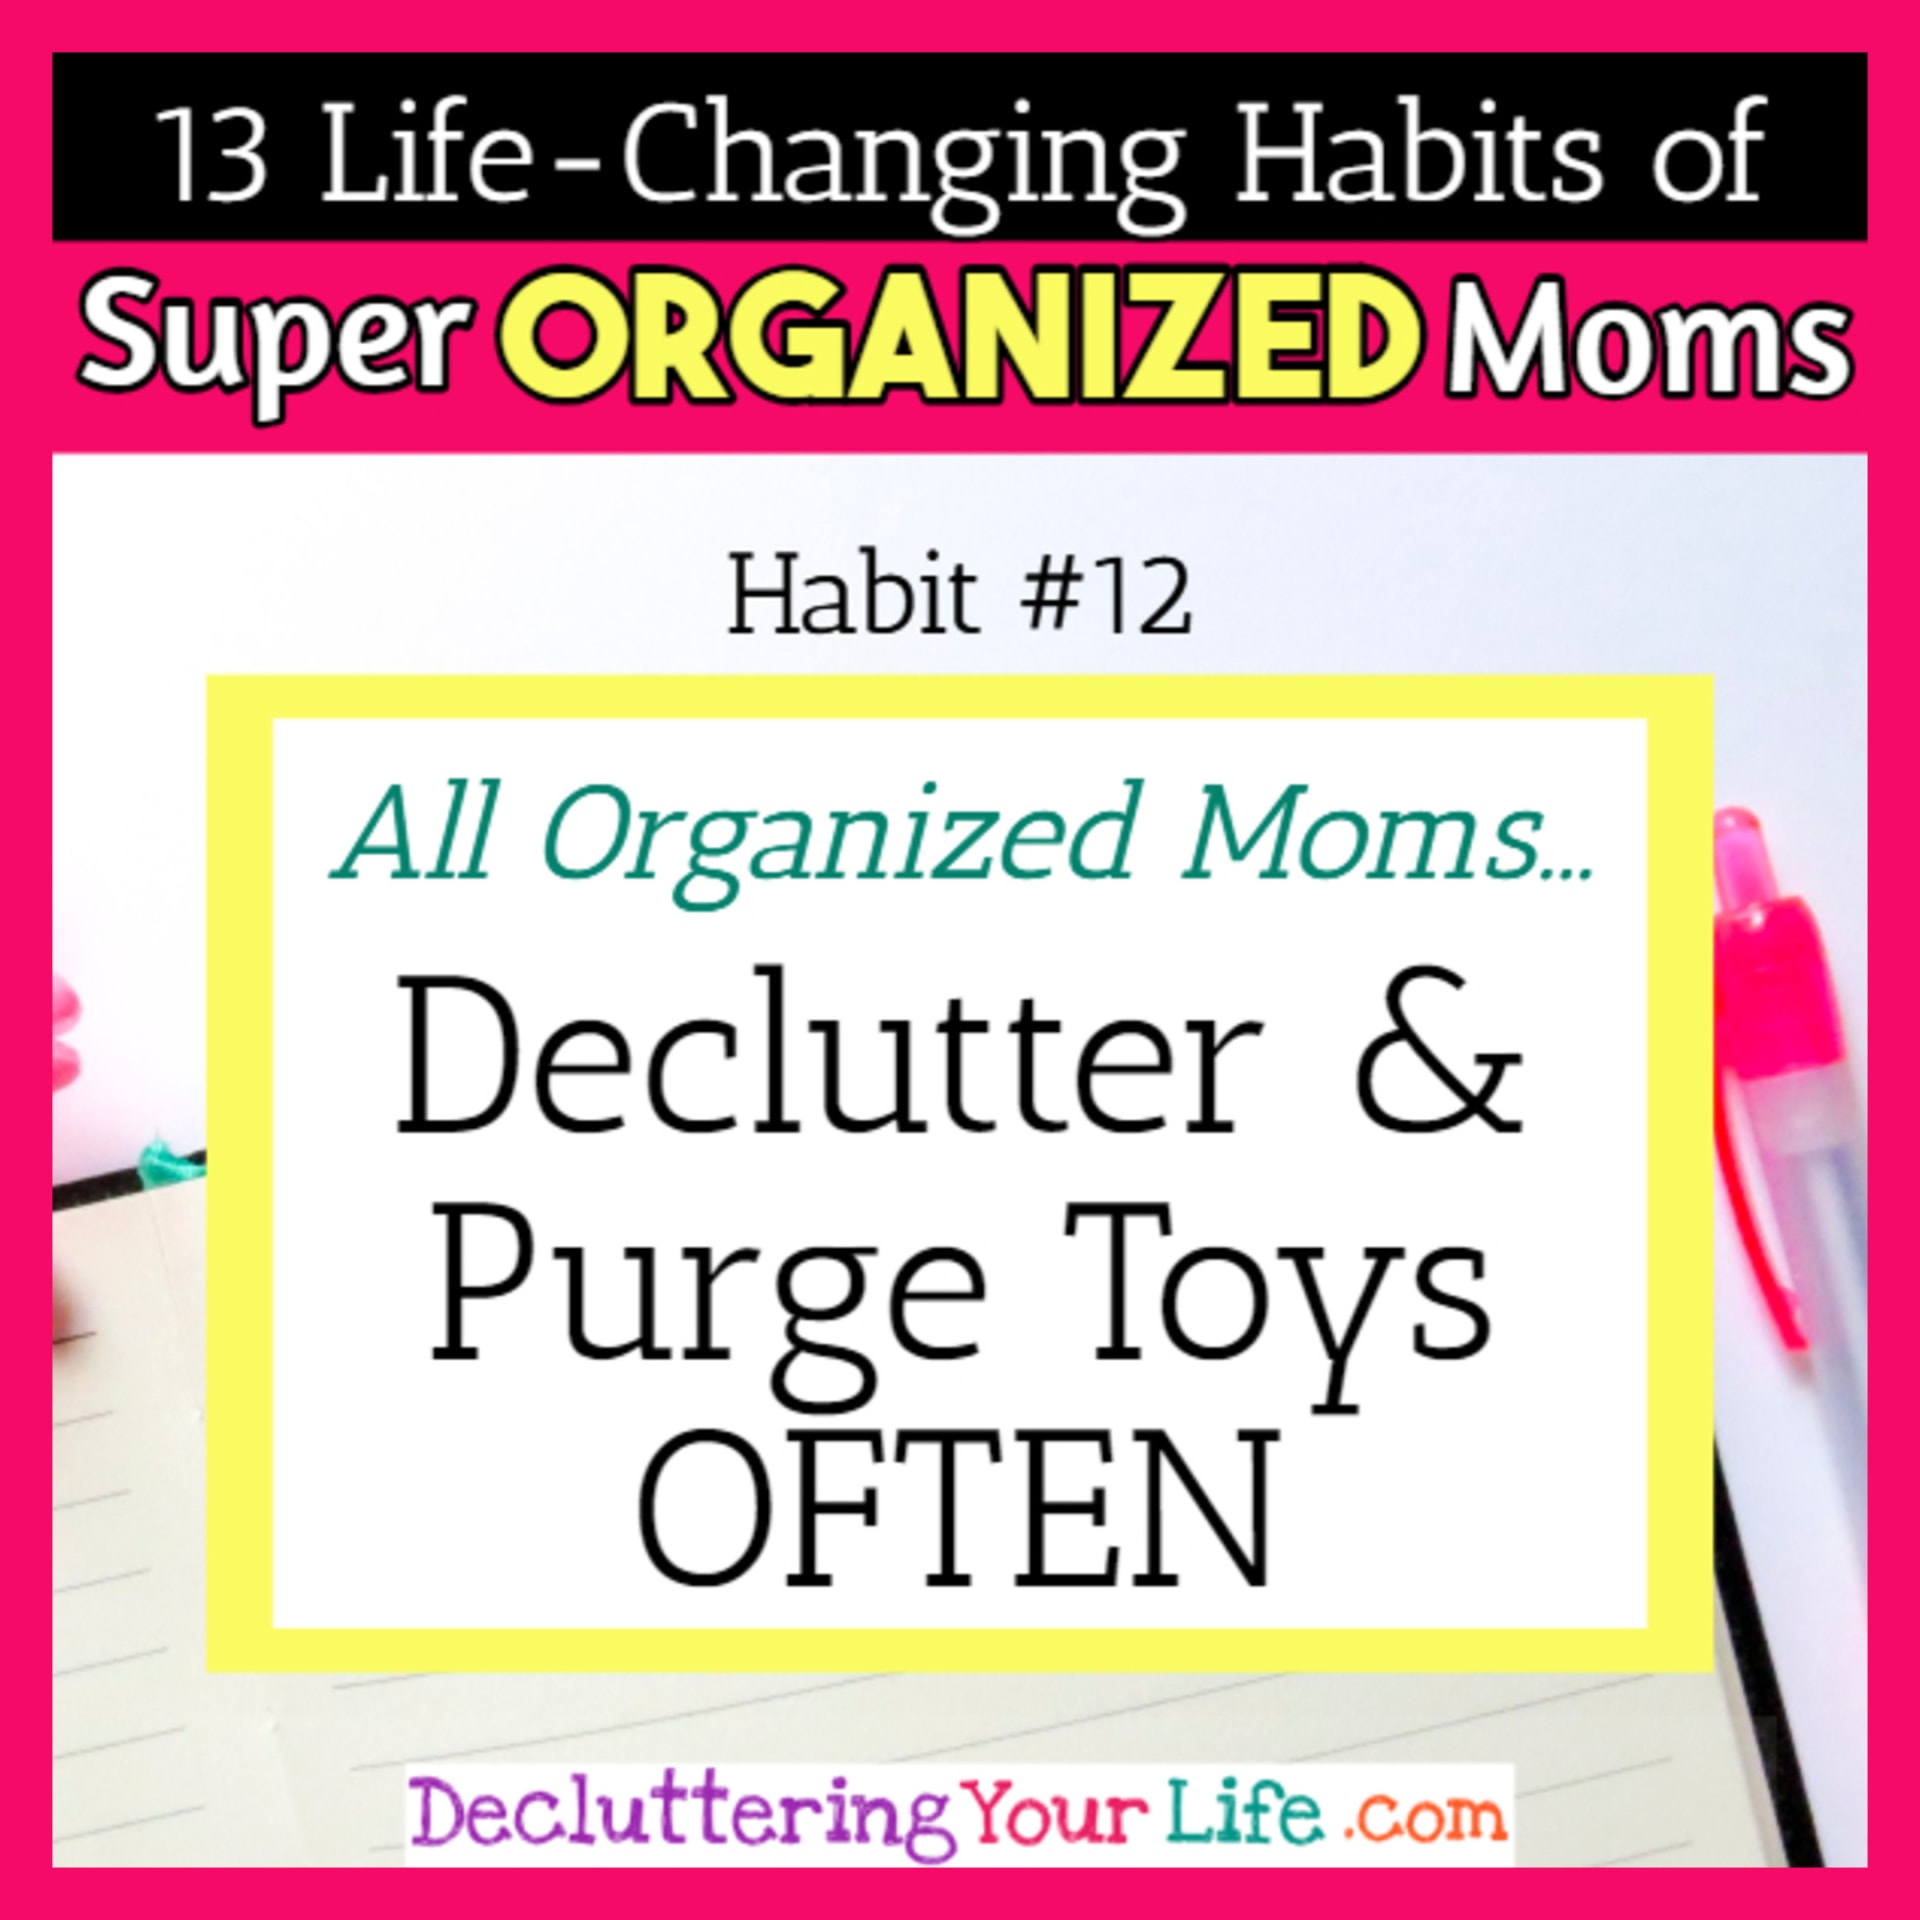 Organized moms declutter, organize and PURGE toys often - 13 Habits of Super Organized Mom - How To Be An Organized Mom (whether you work OR stay at home)